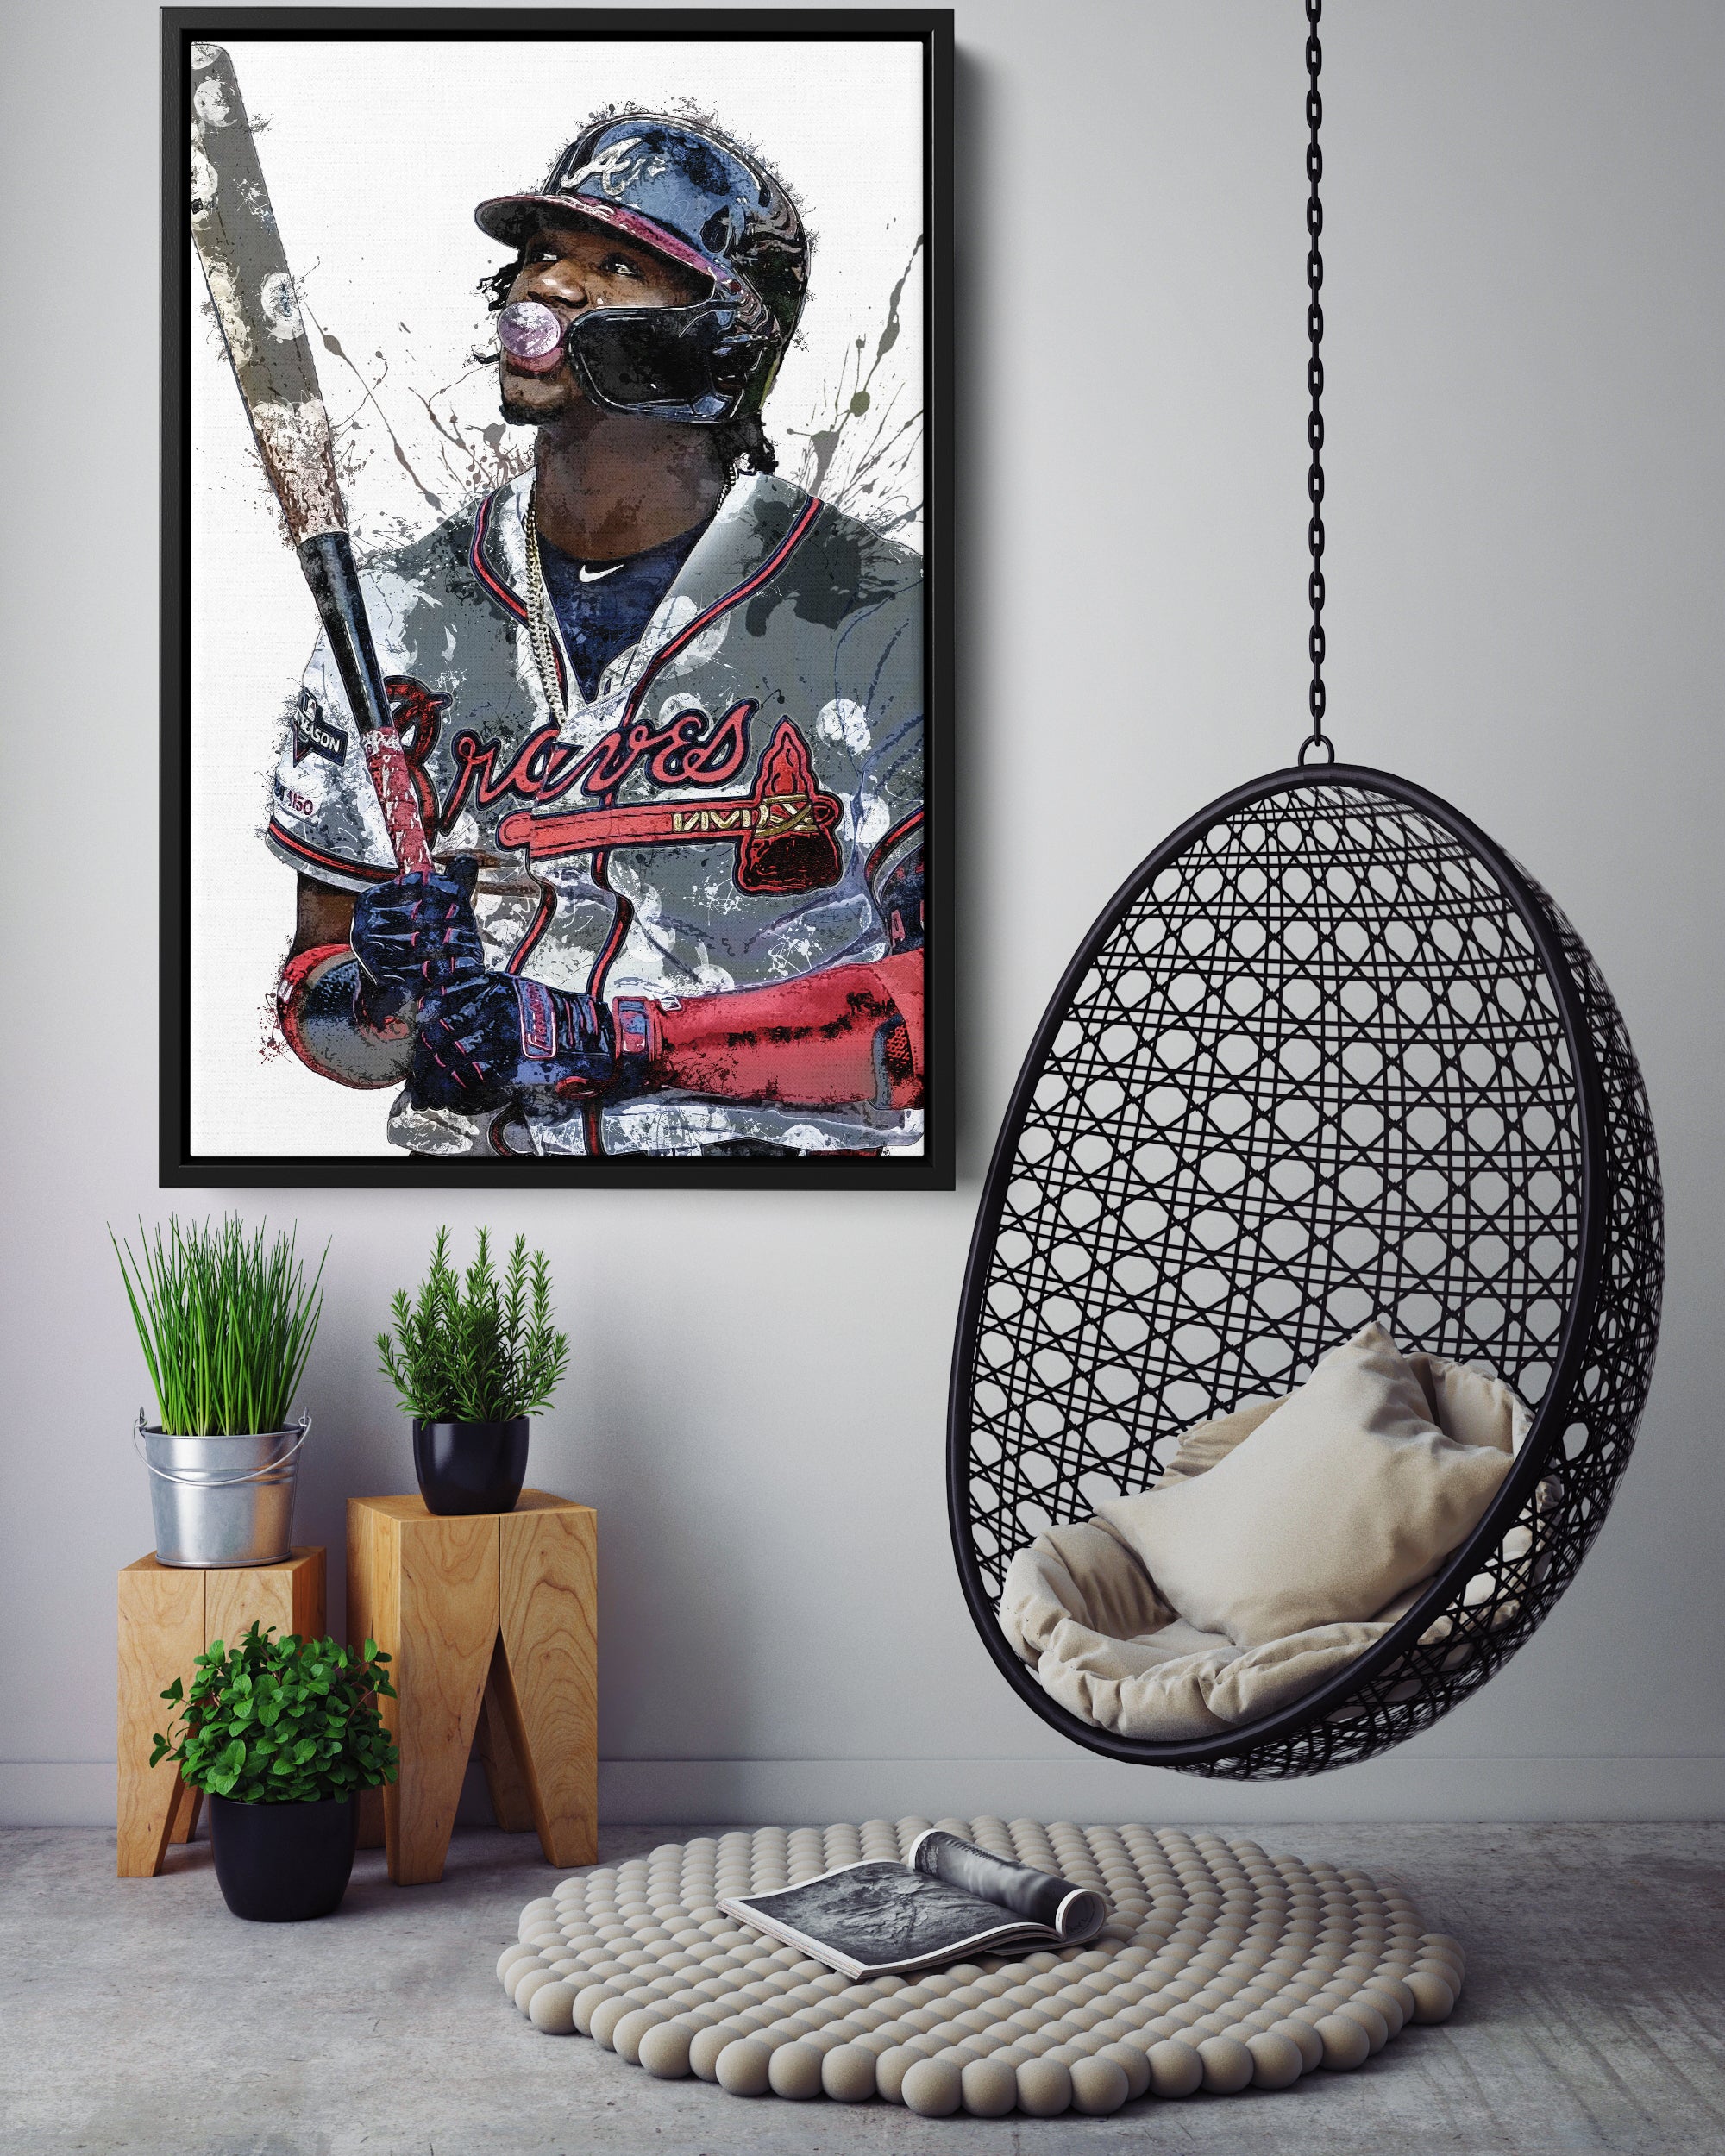  Ronald Acuna Jr. Baseball Canvas Poster Wall Art Decor Print  Picture Paintings for Living Room Bedroom Decoration Unframe:  12x18inch(30x45cm): Posters & Prints